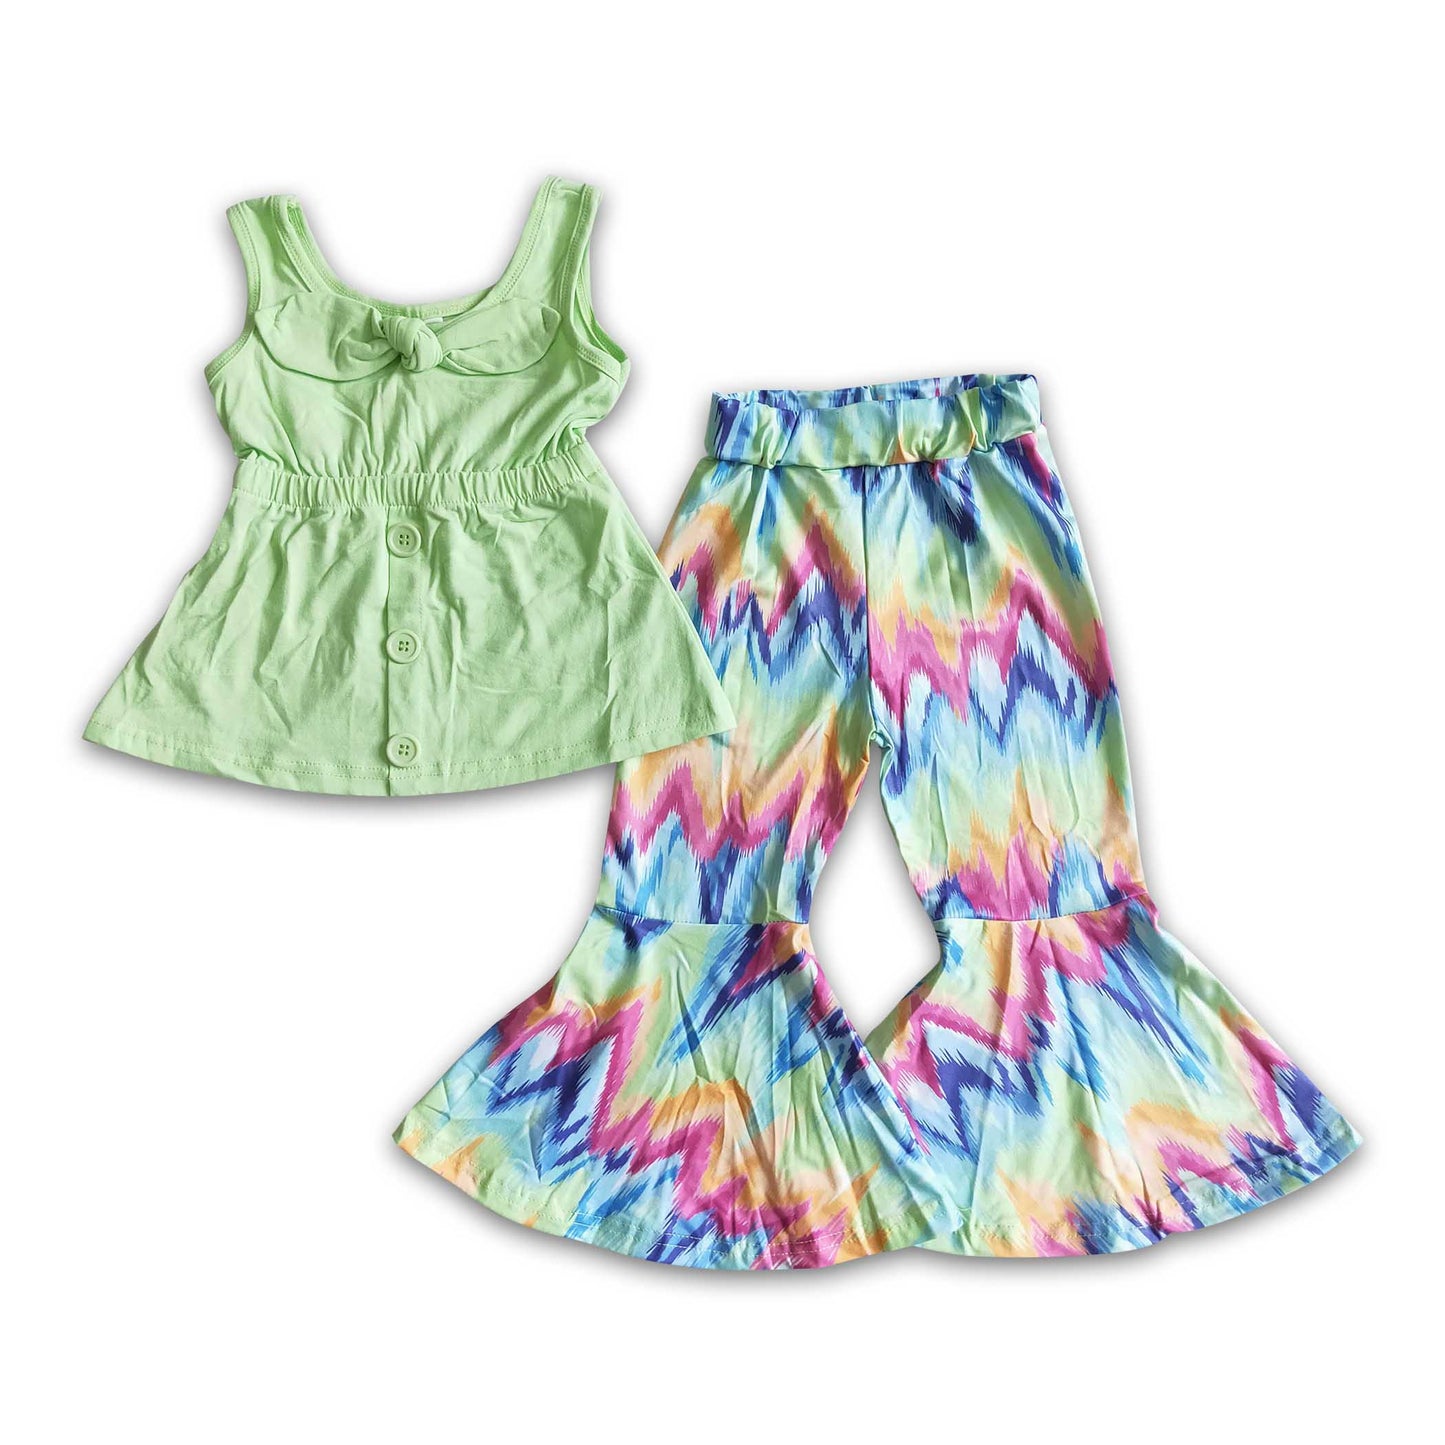 Girl Green Bow Tie Dye Print Outfit